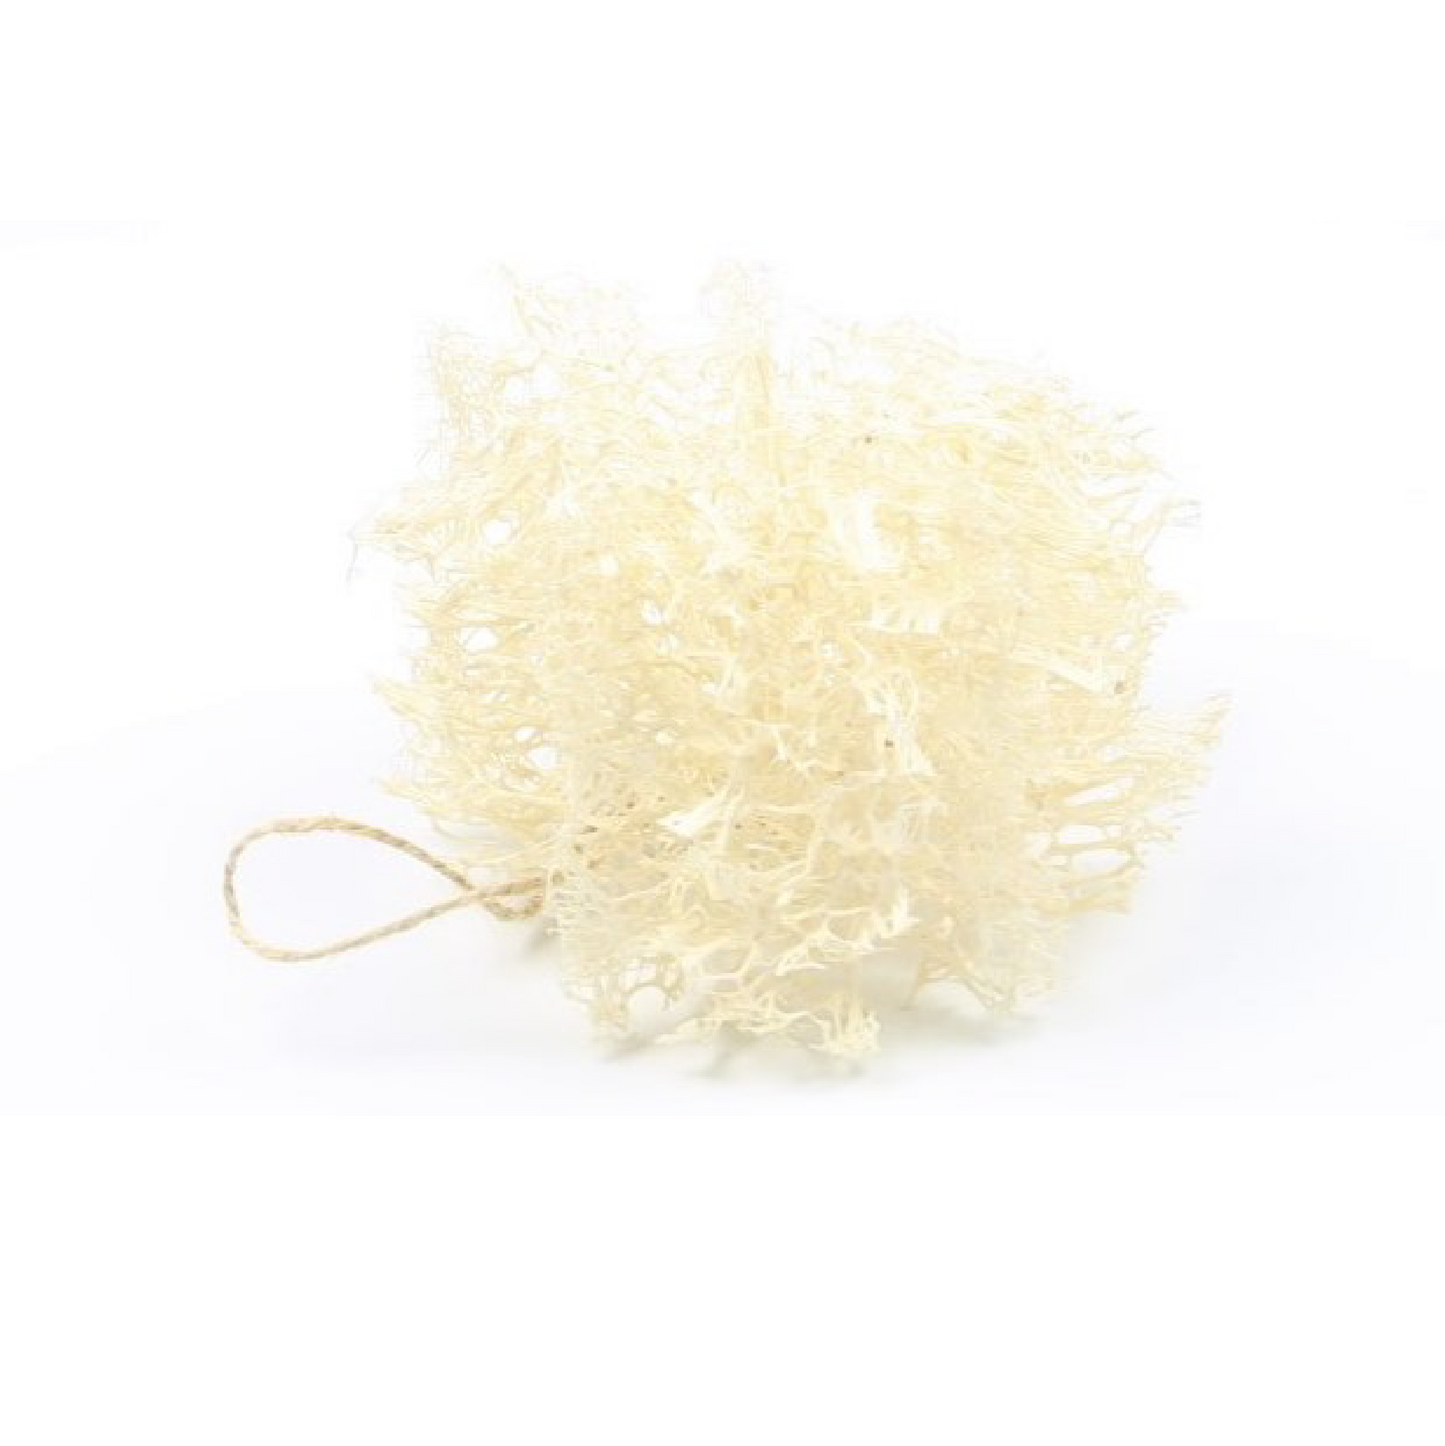 loofah kitchen sponge being showed with a cotton string zero waste